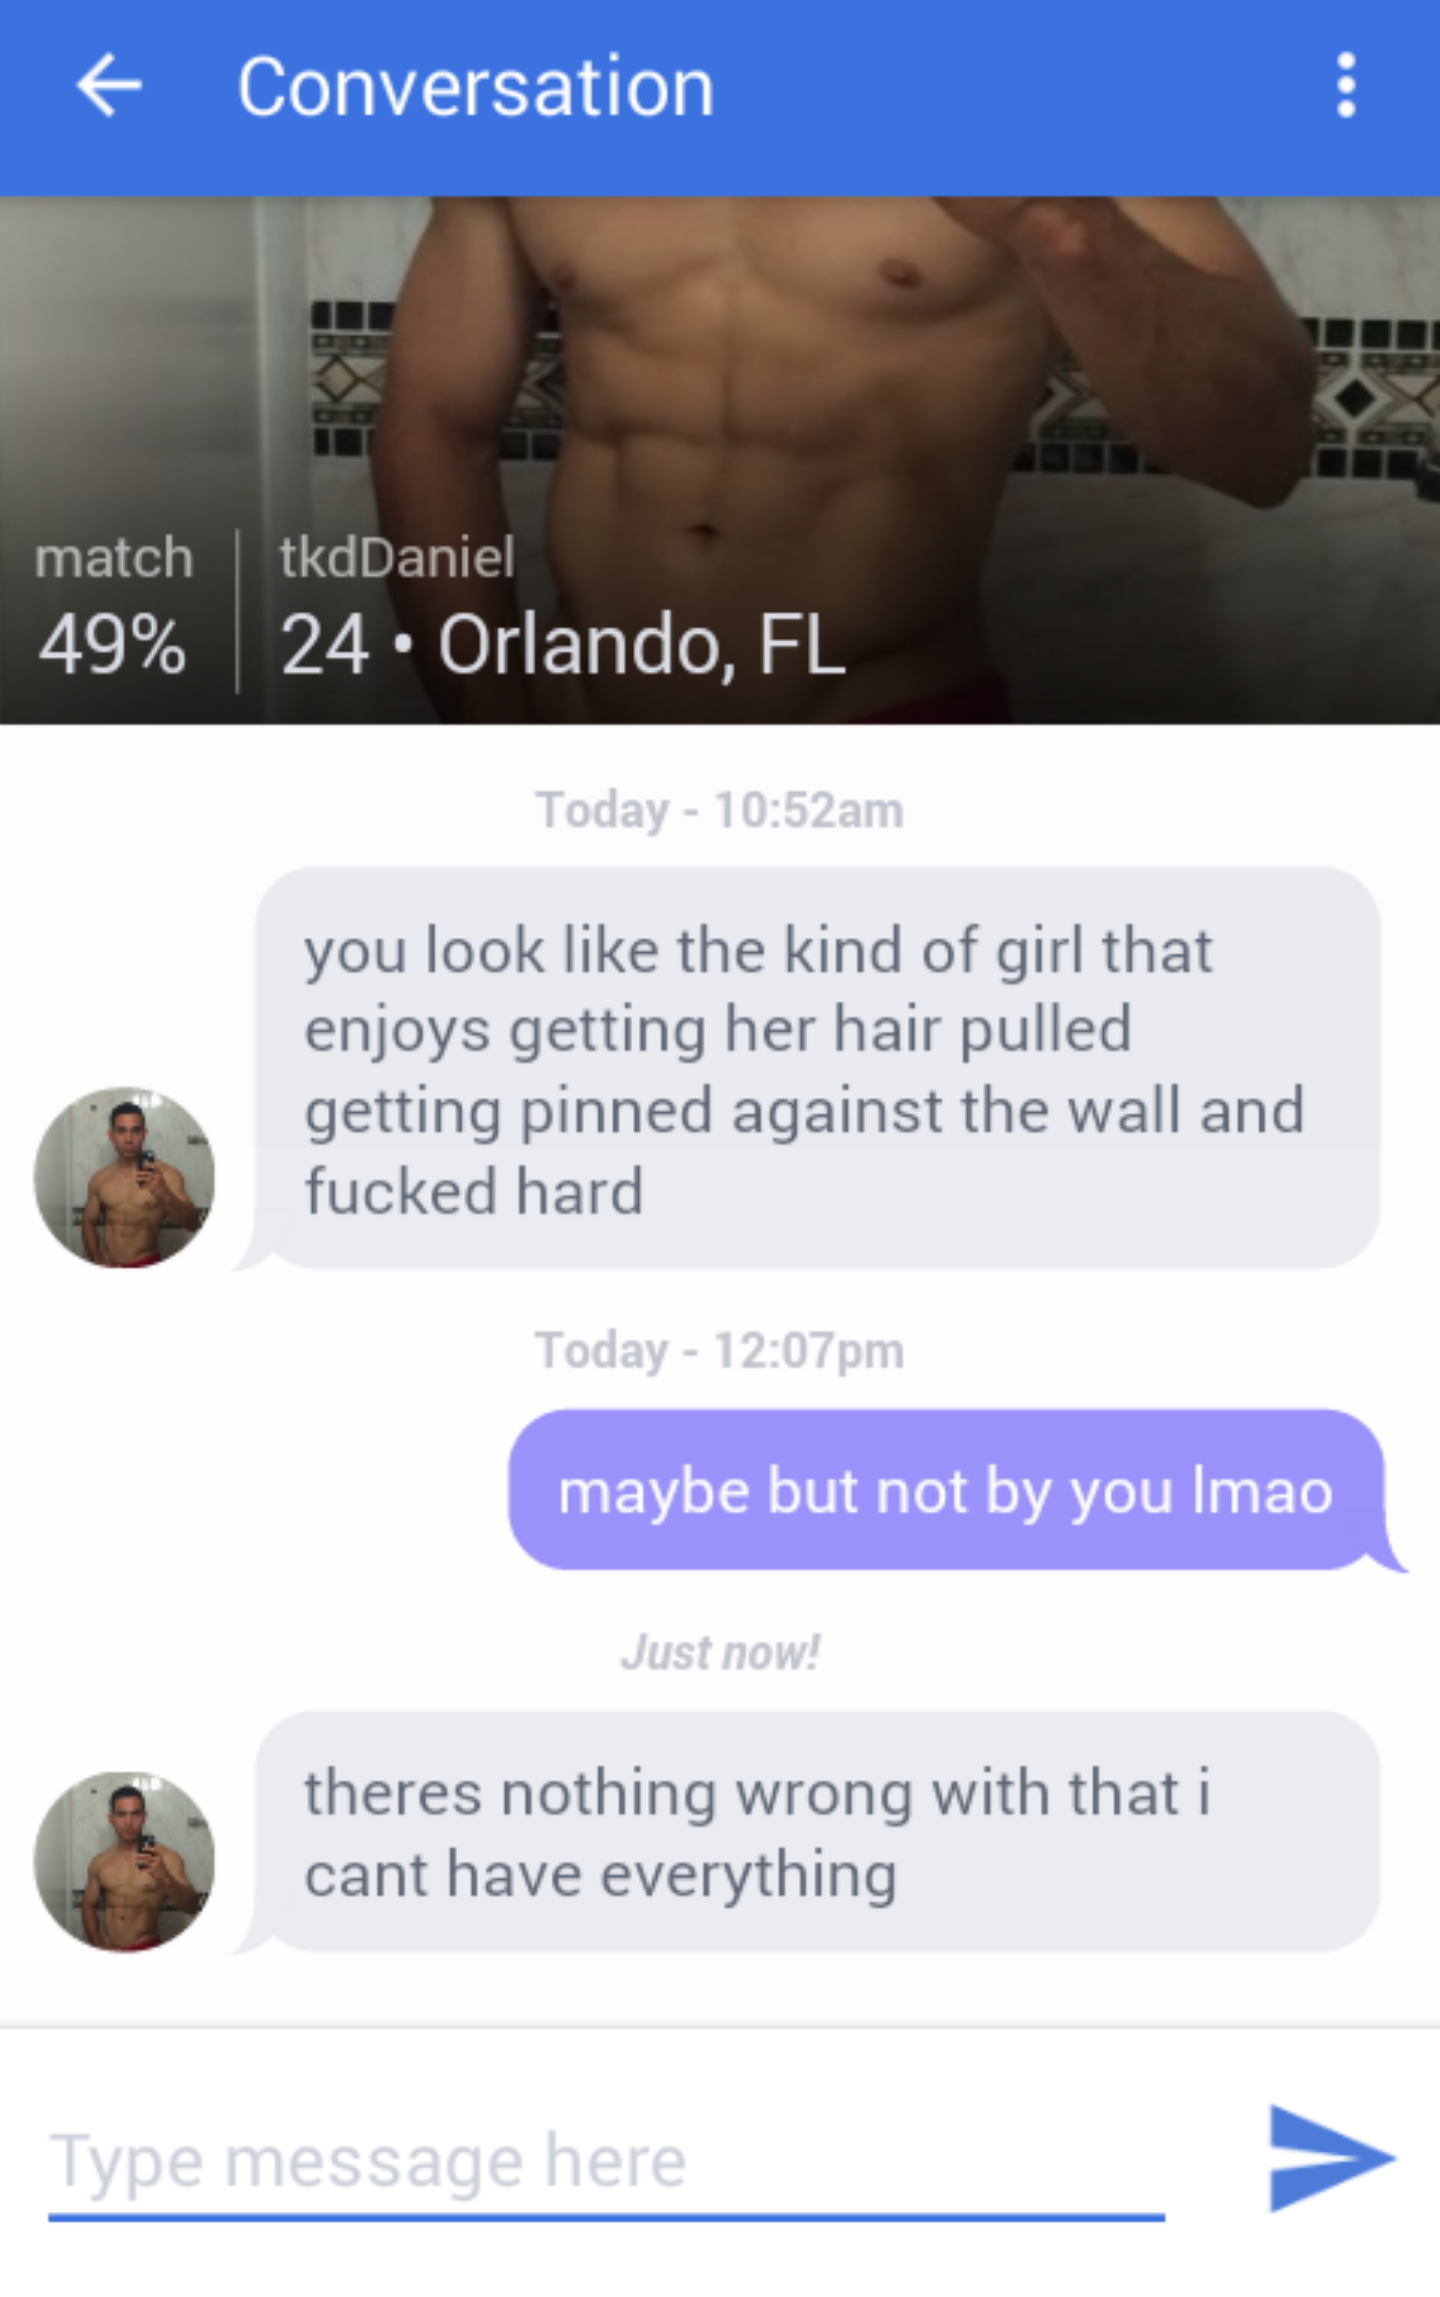 women feminine-memes women text: match 49% Conversation tkdDaniel 24 • Orlando, FL Today - 10:52am you look like the kind of girl that enjoys getting her hair pulled getting pinned against the wall and fucked hard Today - 12:07pm maybe but not by you Imao Just now! theres nothing wrong with that i cant have everything Type n ness age here 